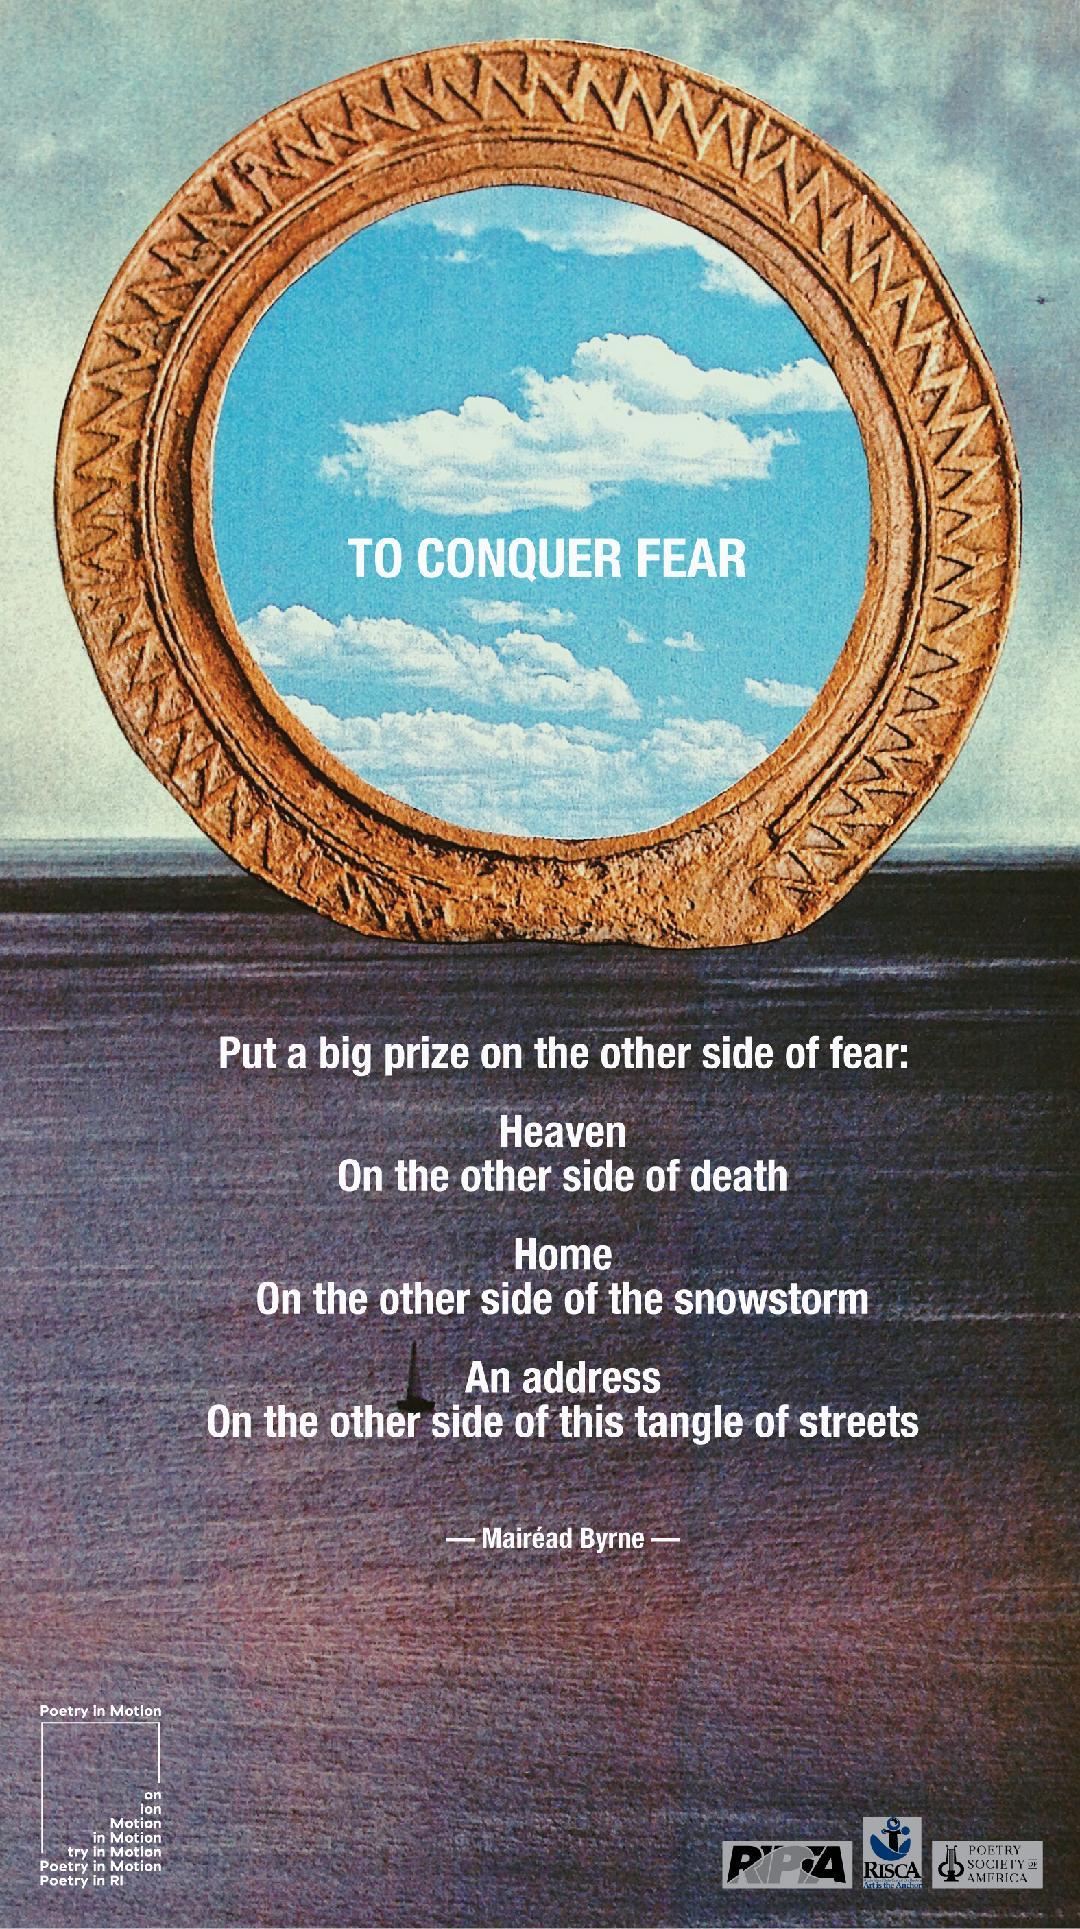 A poster shows a mirror reflecting blue sky with white clouds. It sits on a dark body of water. The poster includes a poem titled To Conquer Fear, written by Mairéad Byrne.